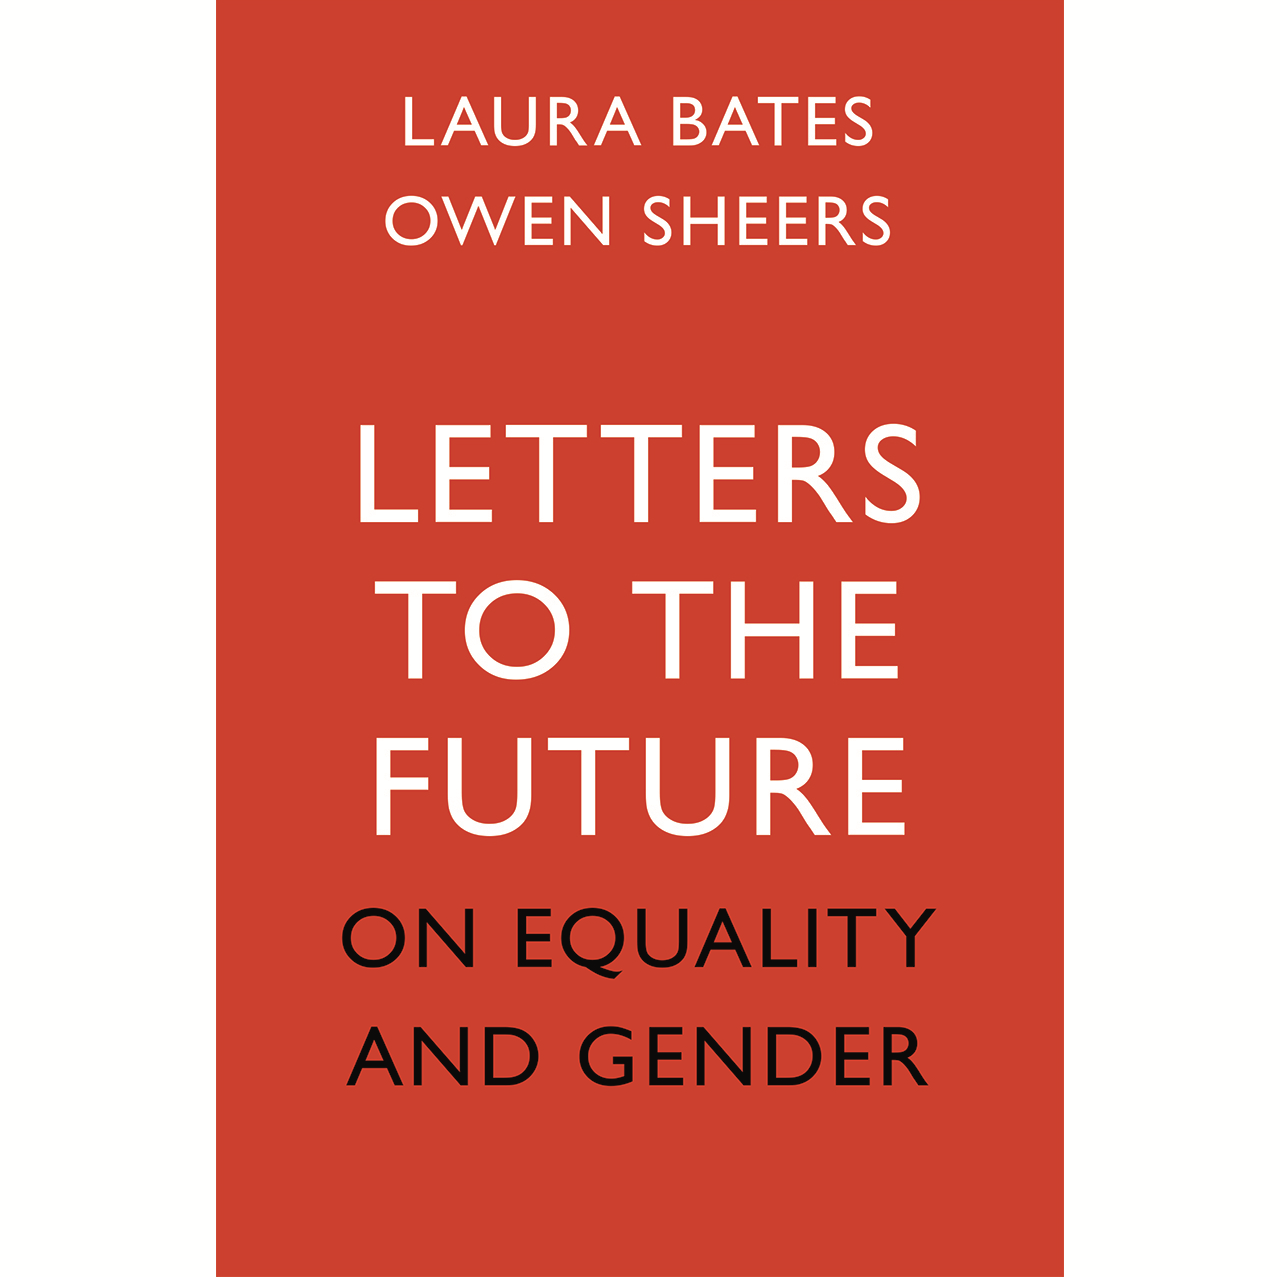 Letters to the Future book cover